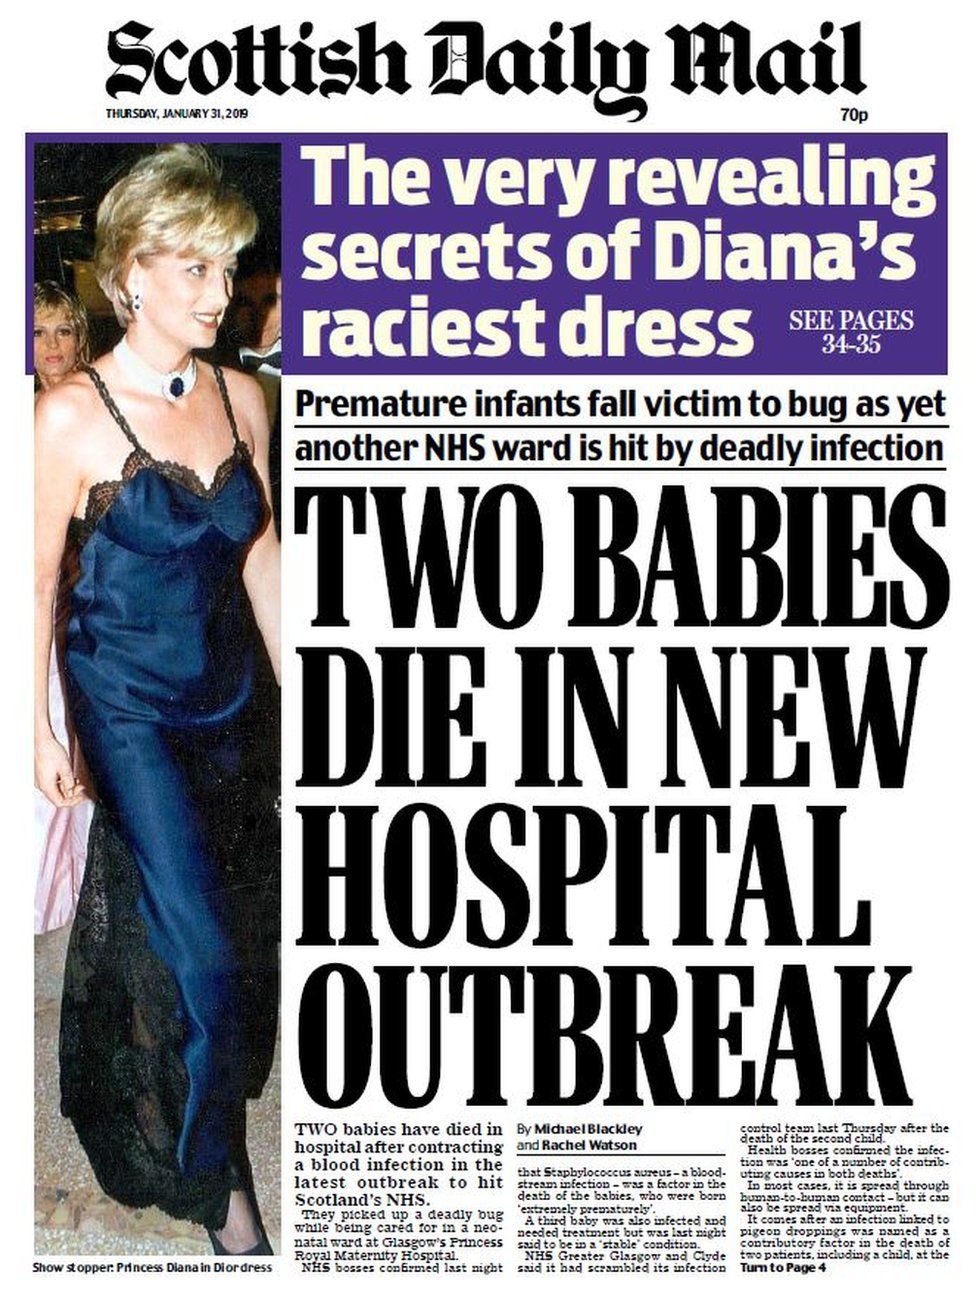 Scotland's papers: Babies die in new infection outbreak - BBC News